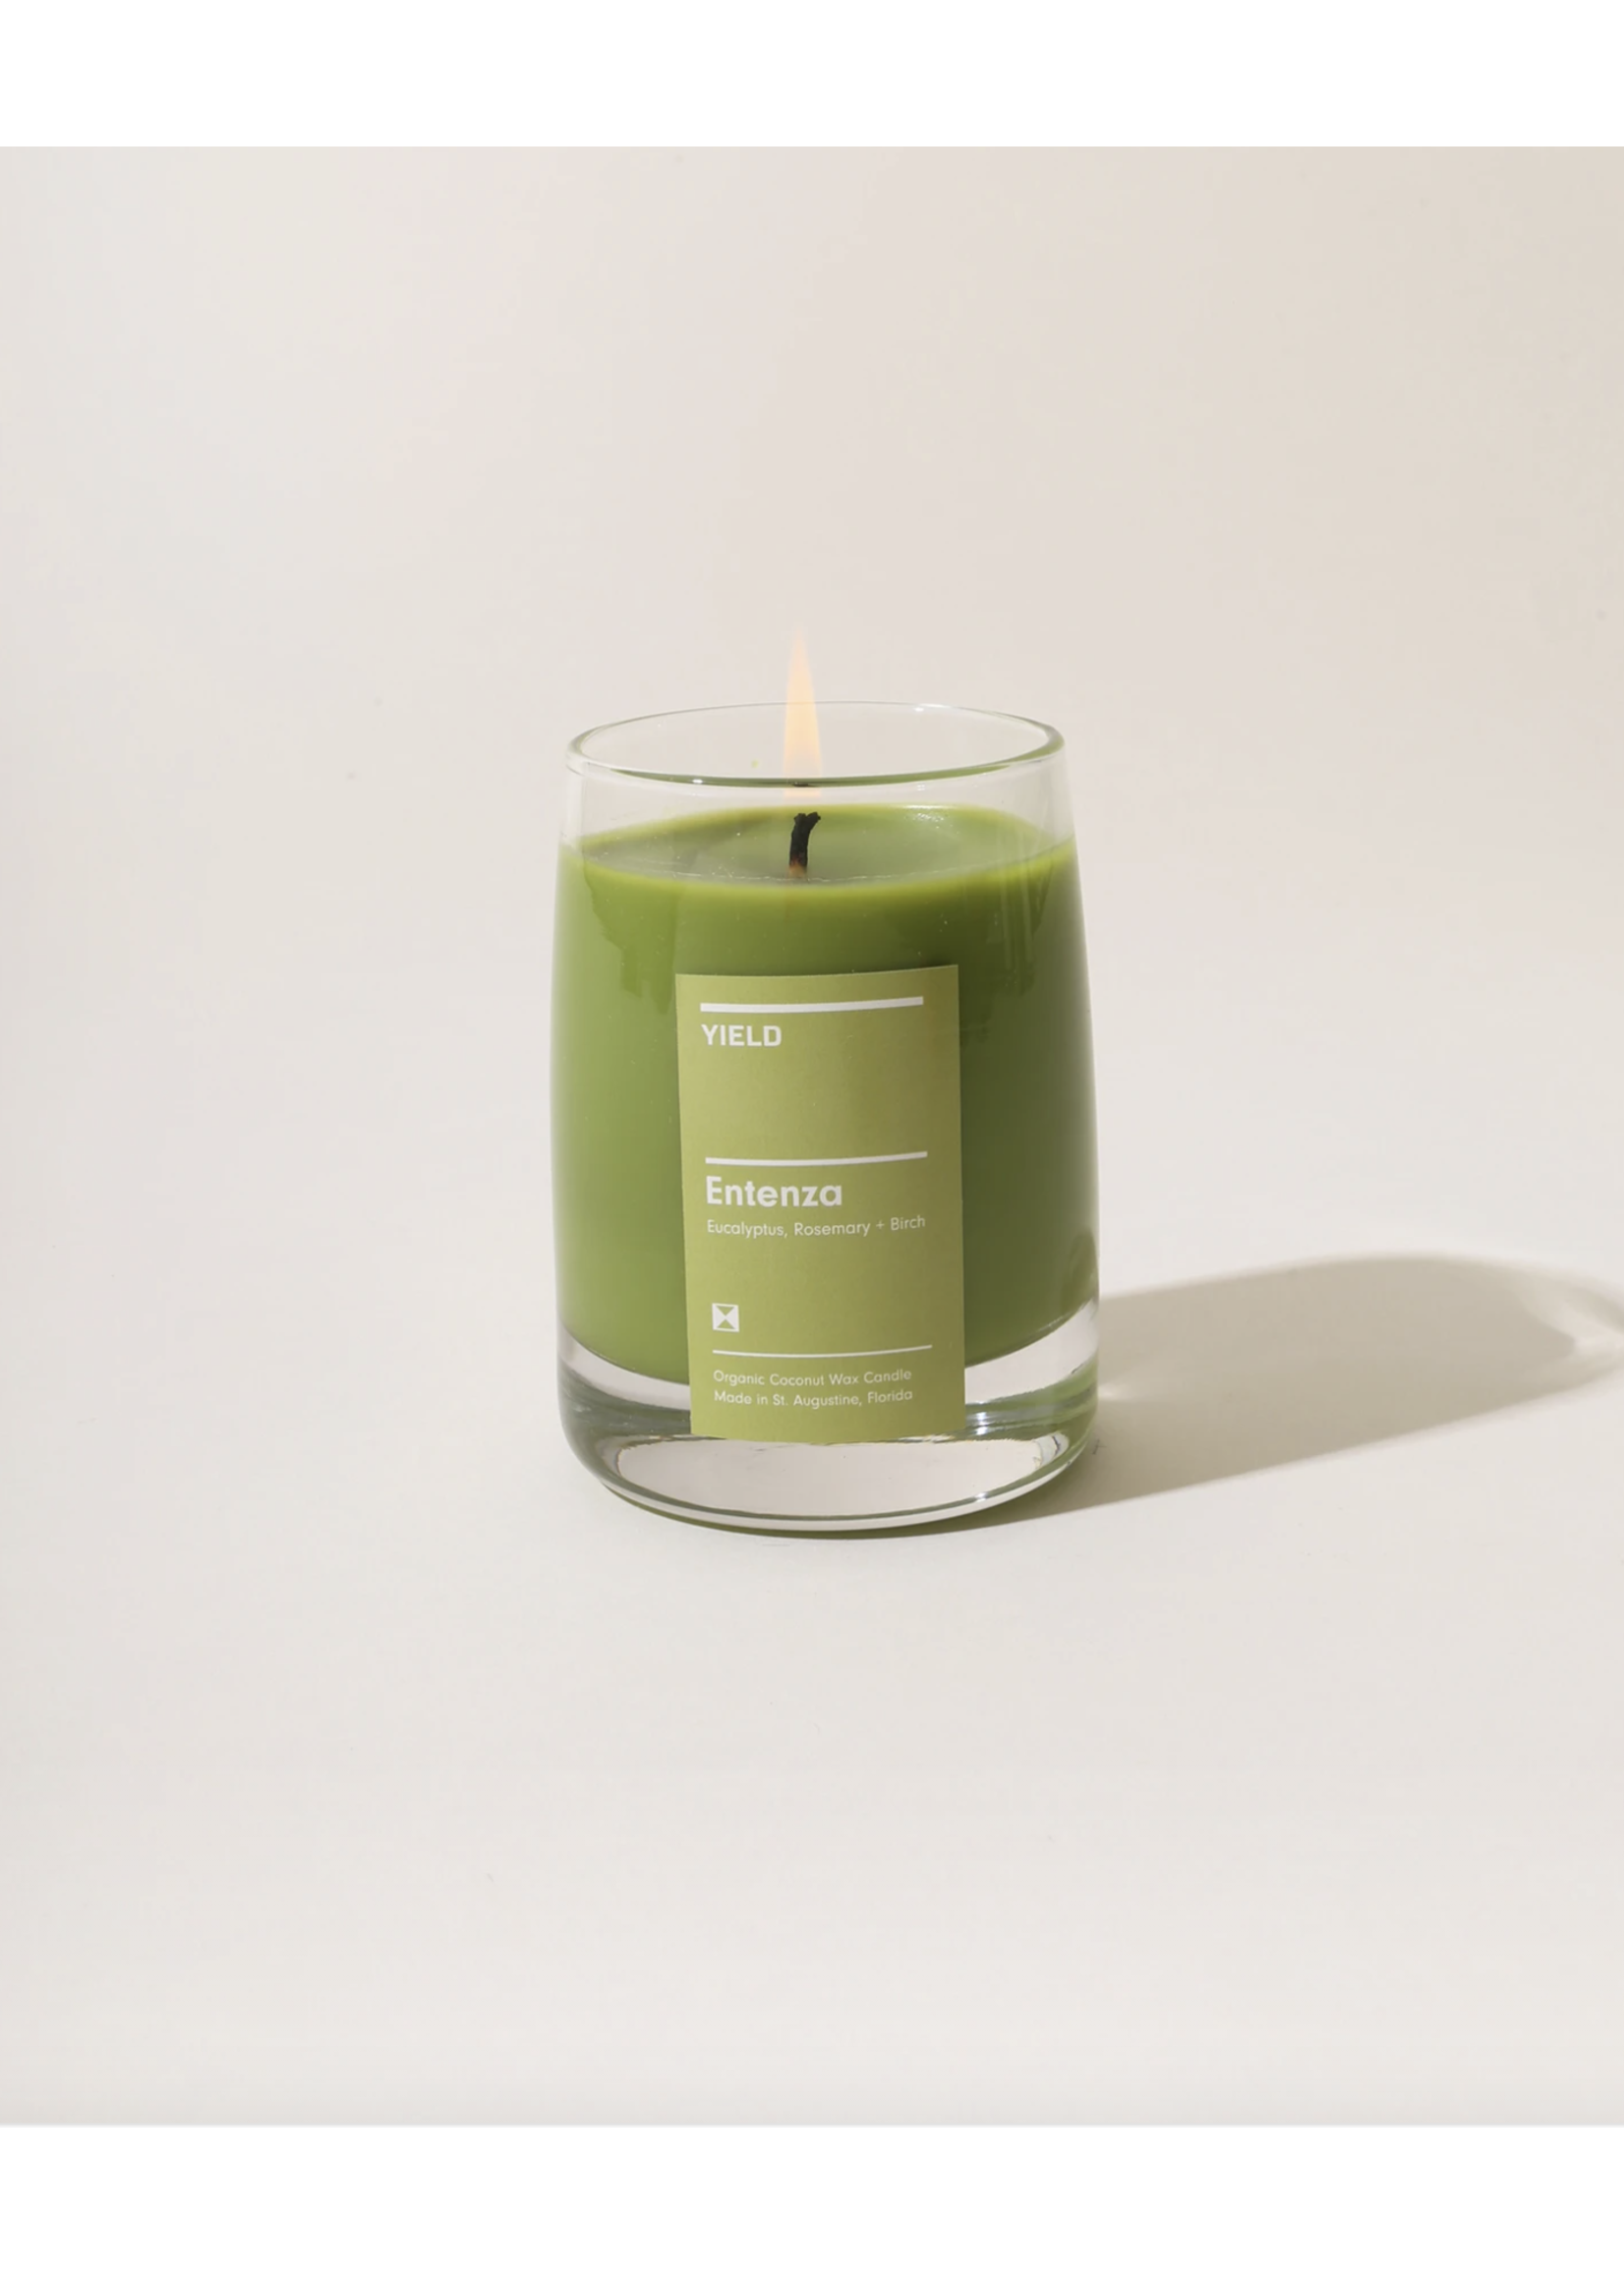 Yield Design 8oz Candles by Yield